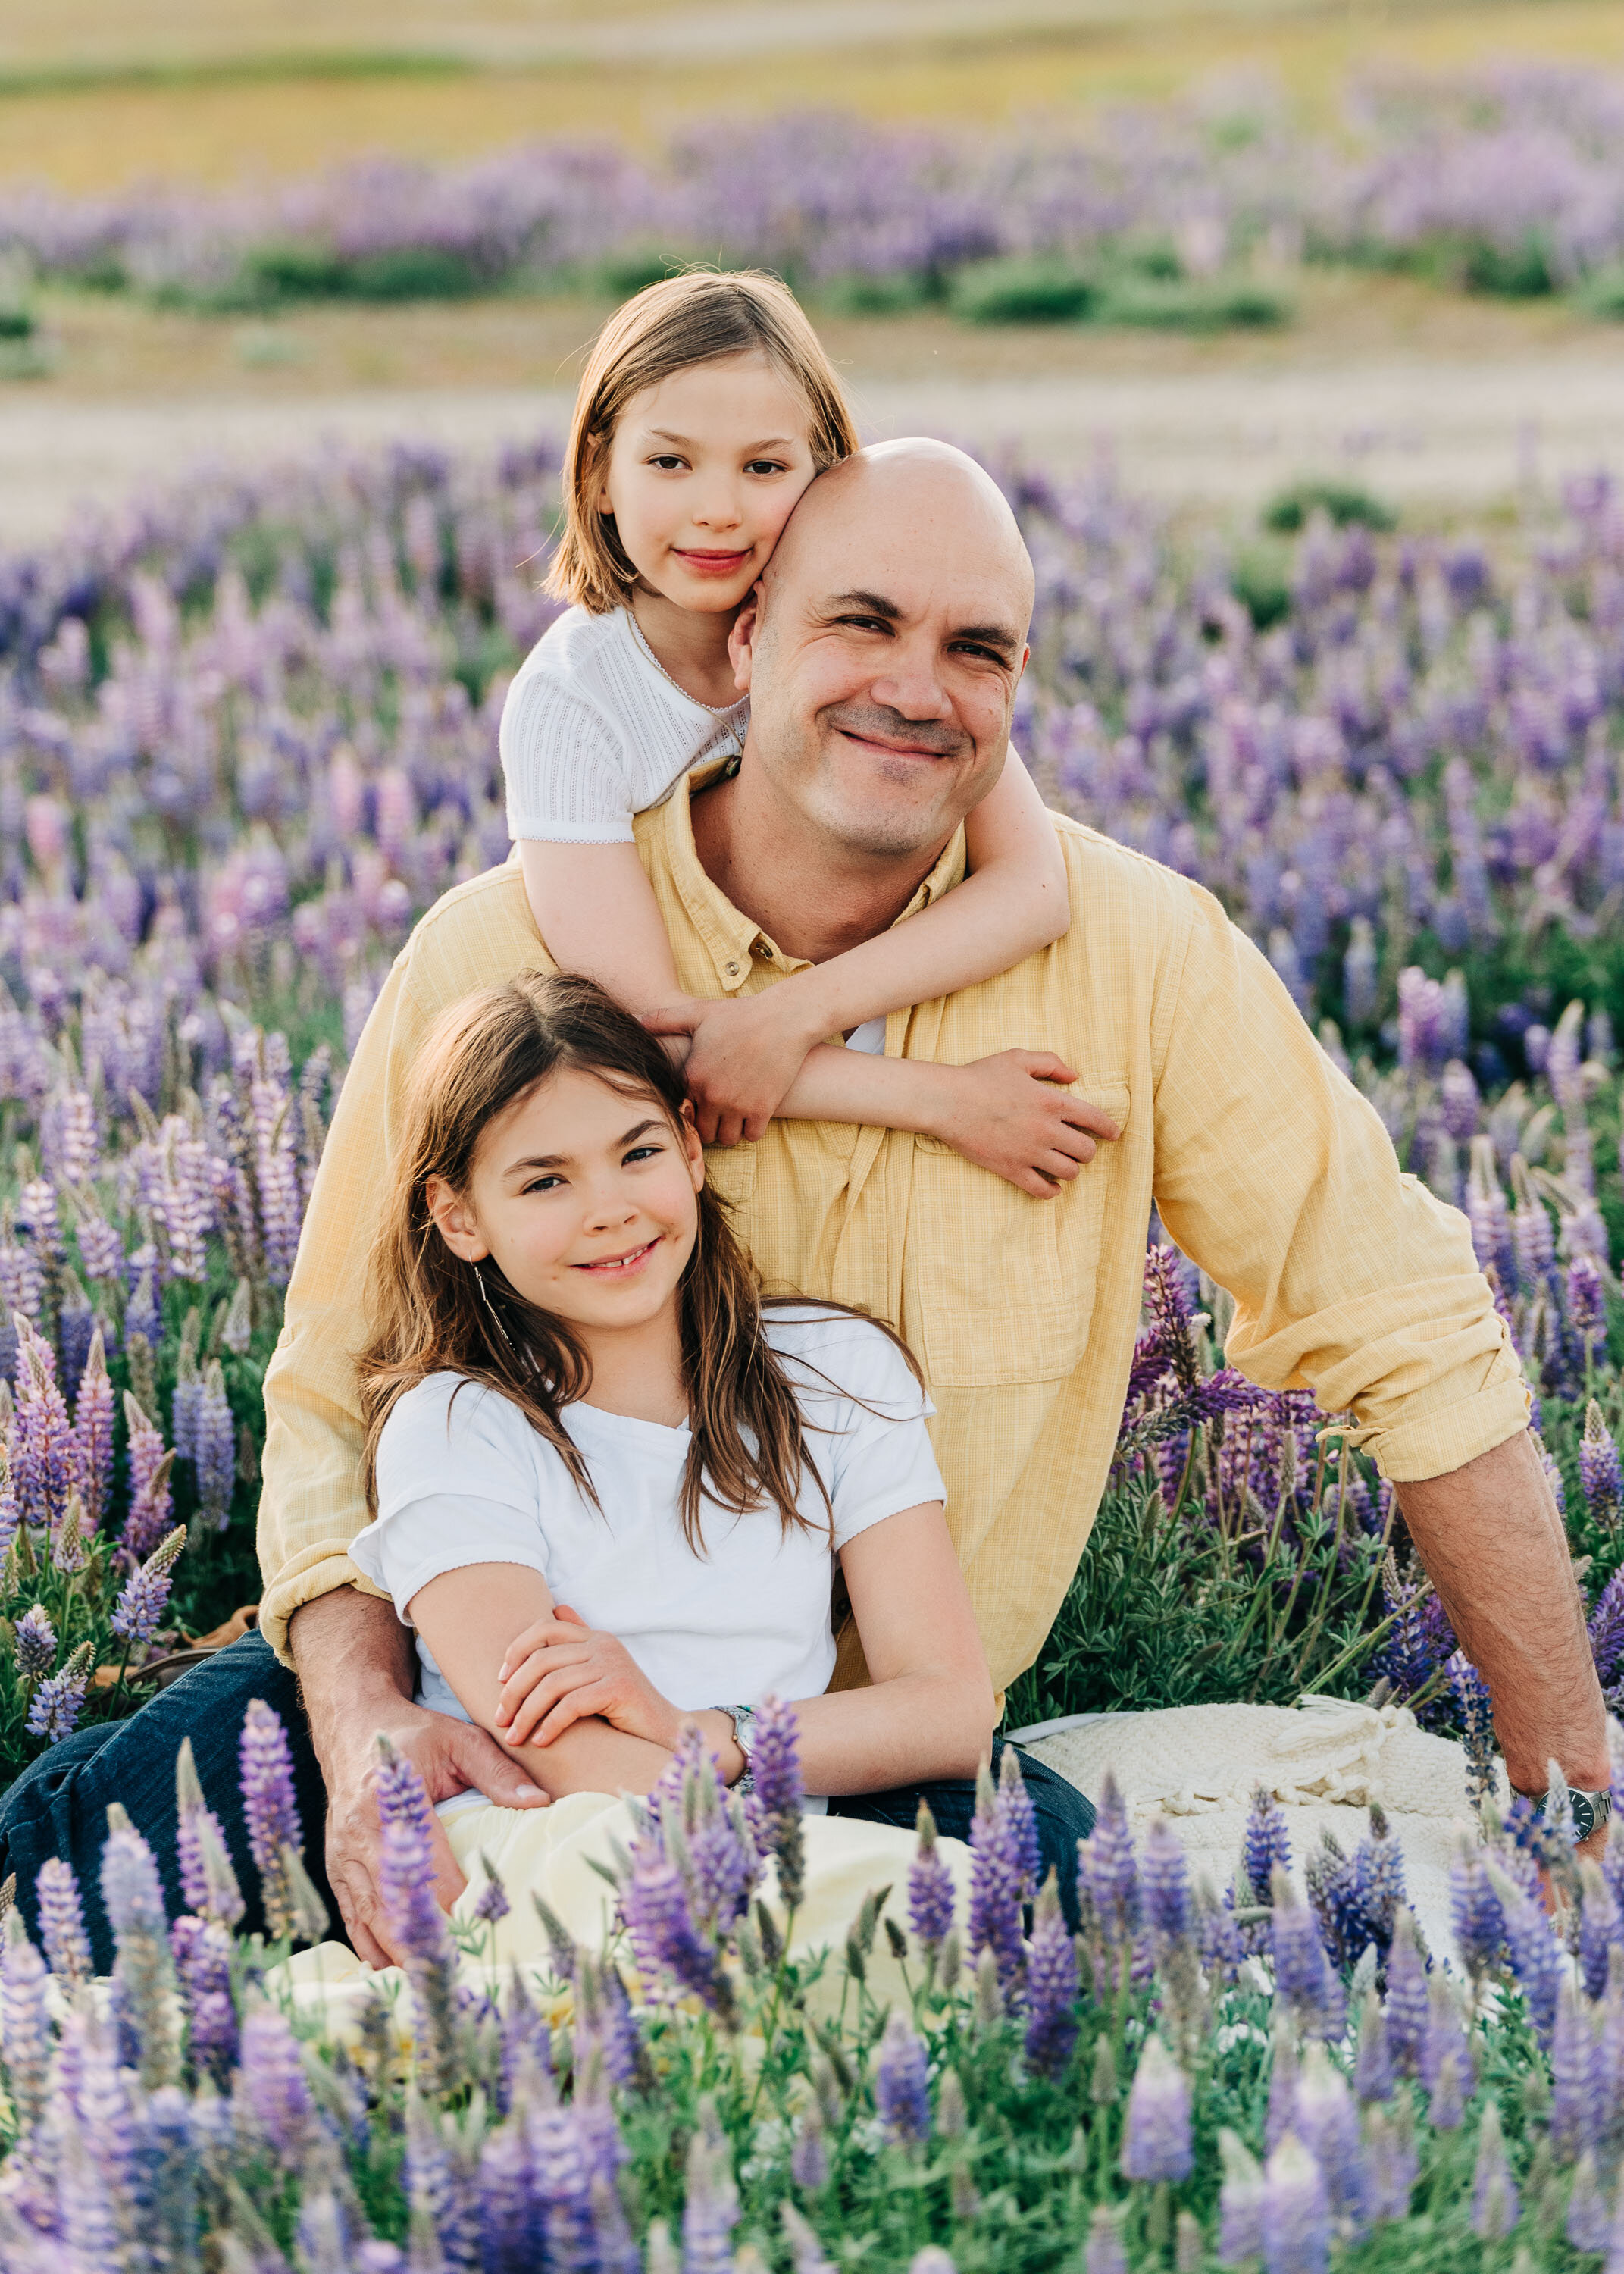 Lupine Wildflowers in Truckee, Reno Lifestyle Family Photography by Kelli Price Photography